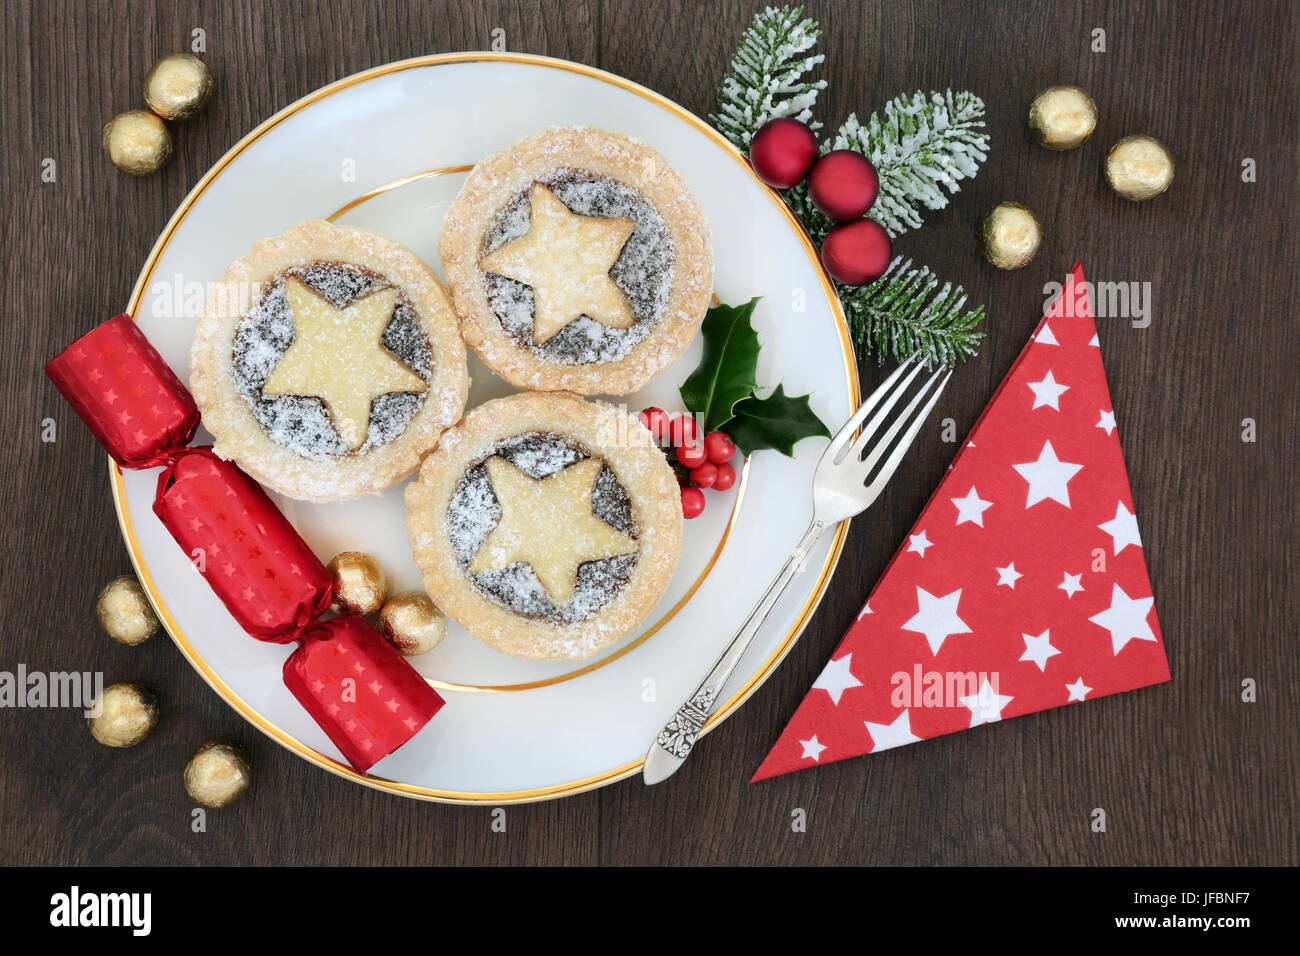 Christmas mince pie tarts on a plate with sliver fork, napkin and cracker with bauble decorations and foil wrapped chocolates on oak background. Stock Photo